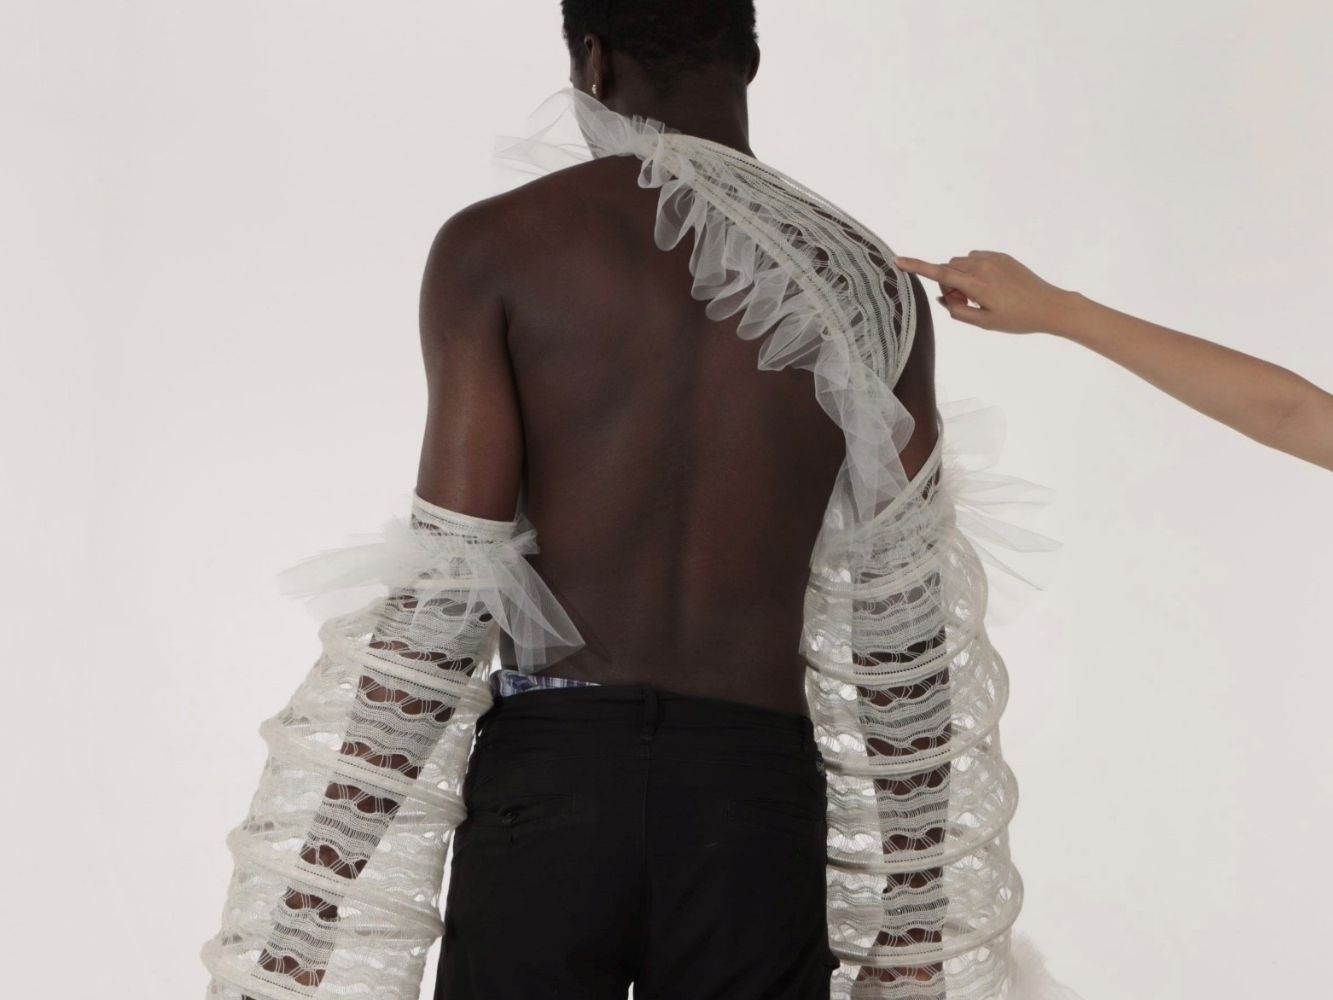 Back of knitted clothing item worn by model, designed to look like a marine organism